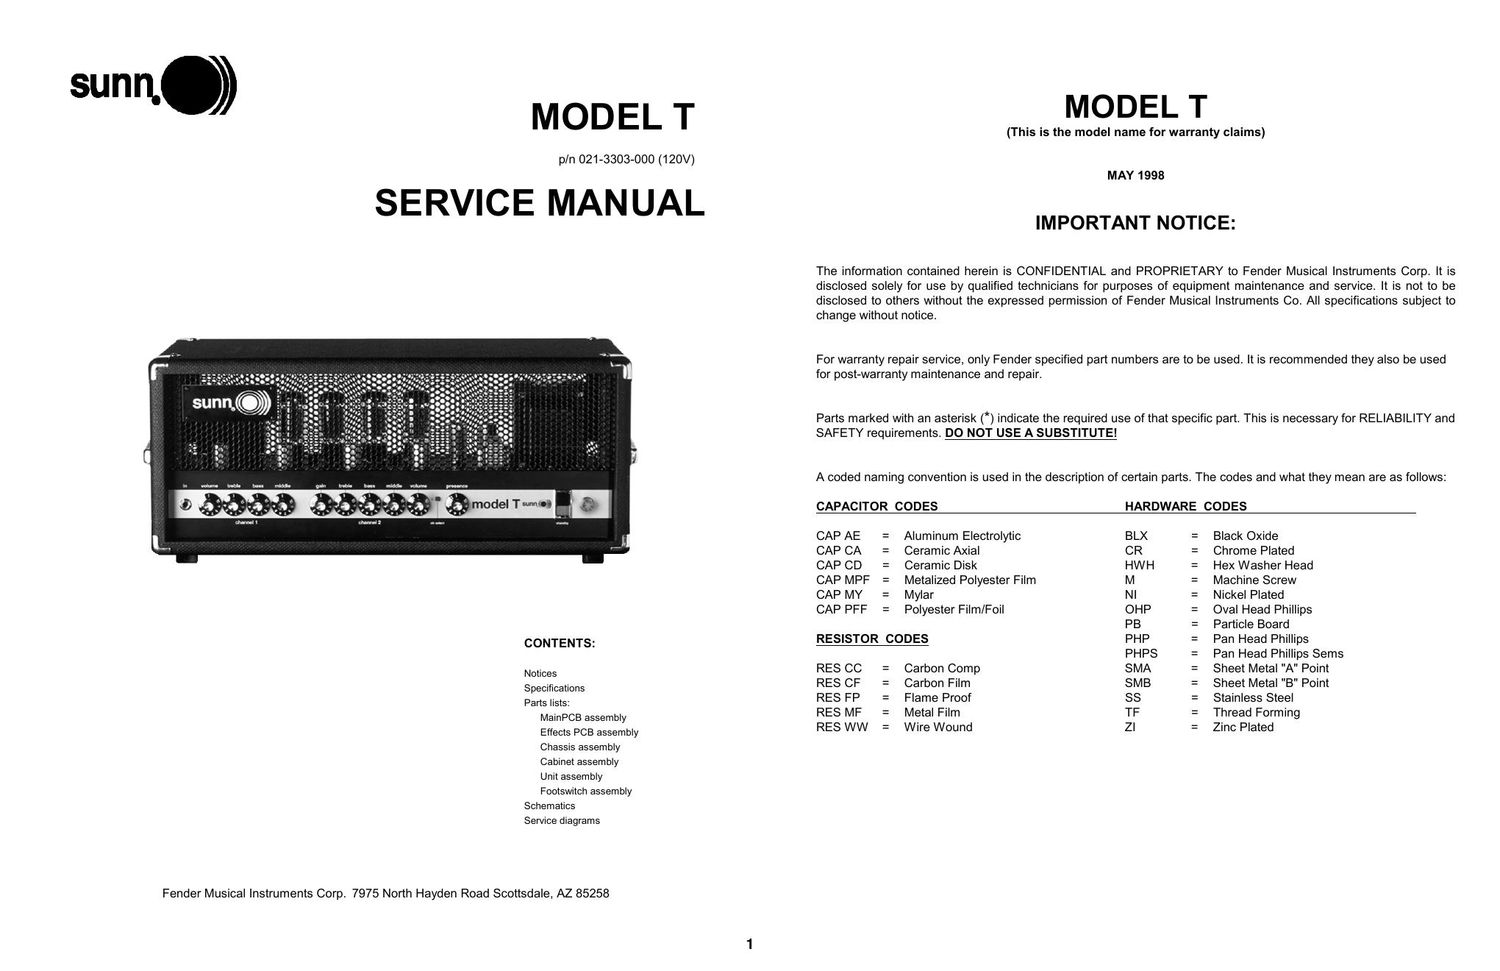 sunn model t re issue service manual